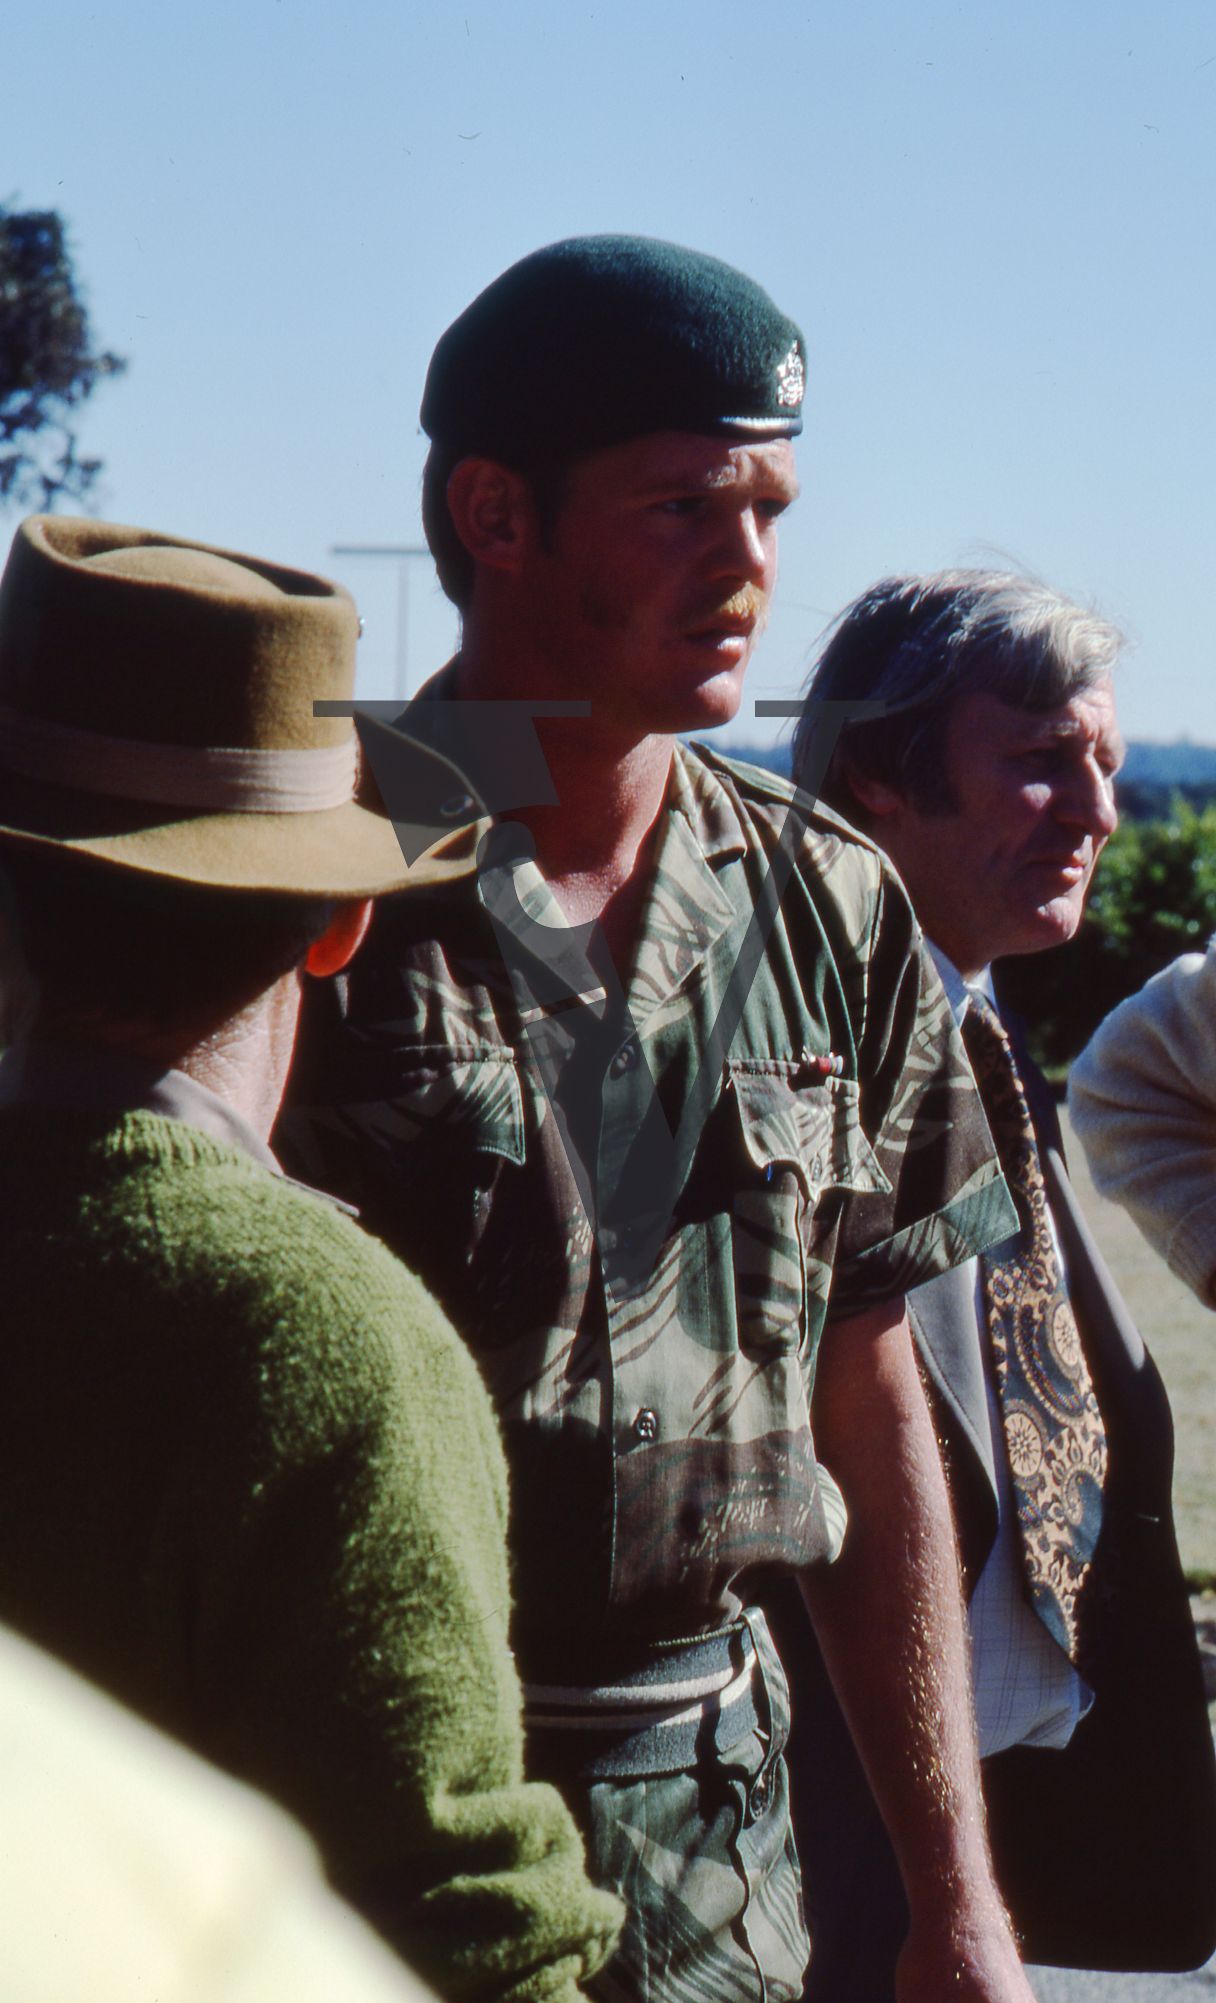 Rhodesia, Rhodesian Light Infantry, passing out ceremony, soldier in crowd, mid-shot.